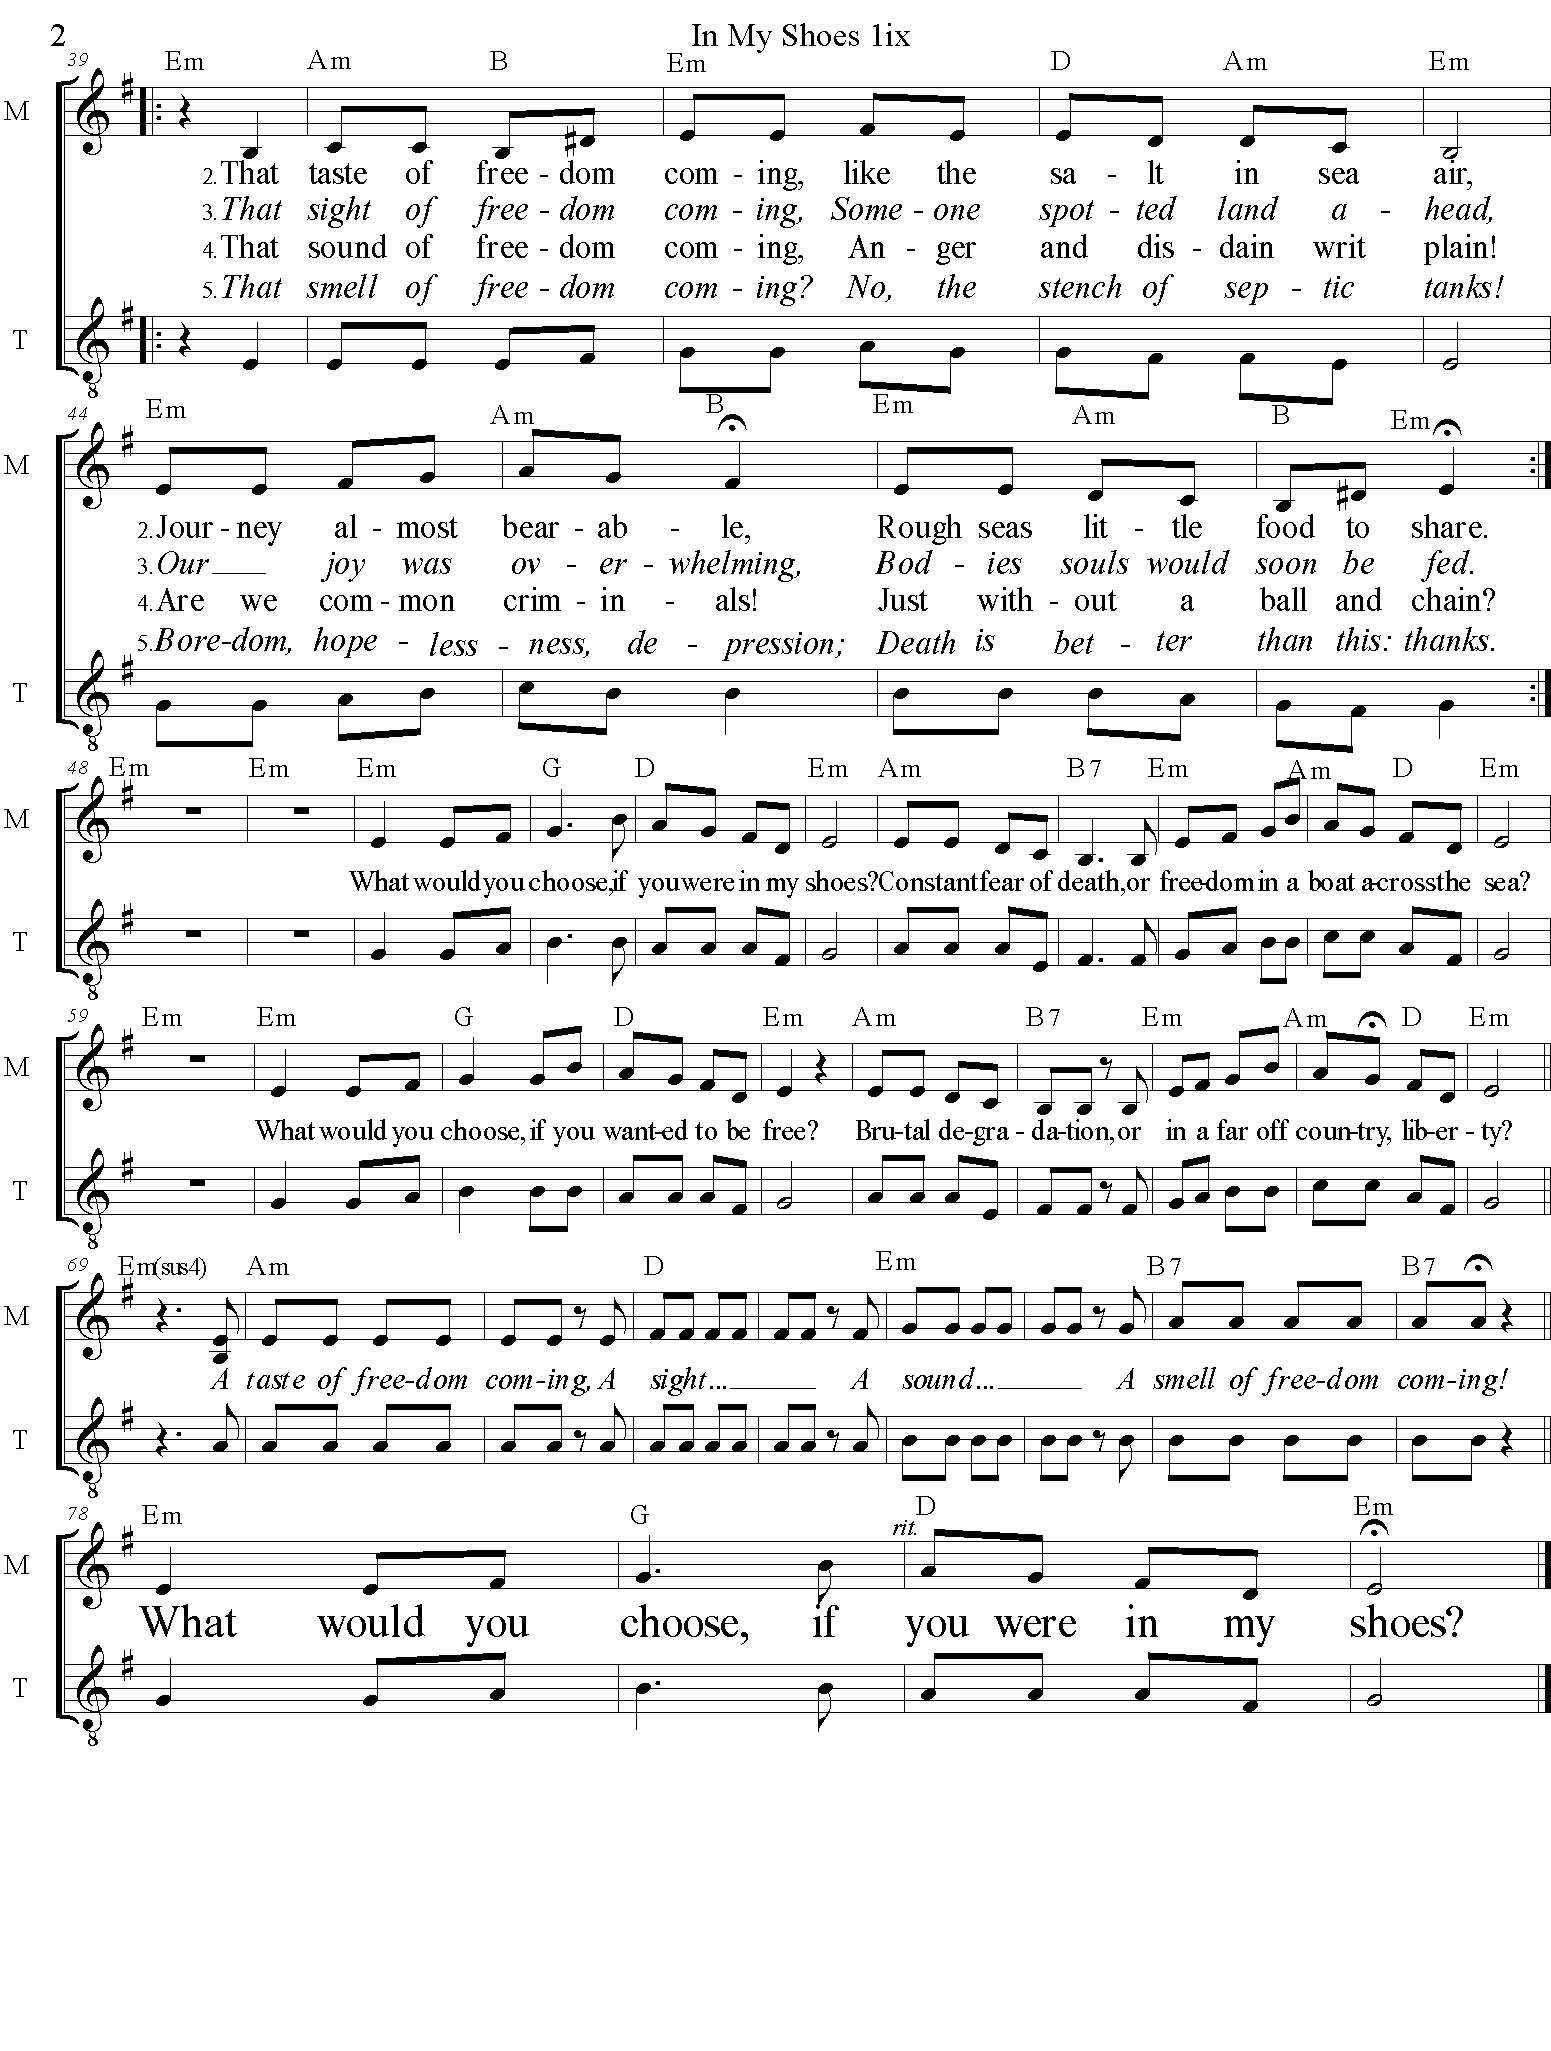 Im My Shoes Sheet Music Em page 2